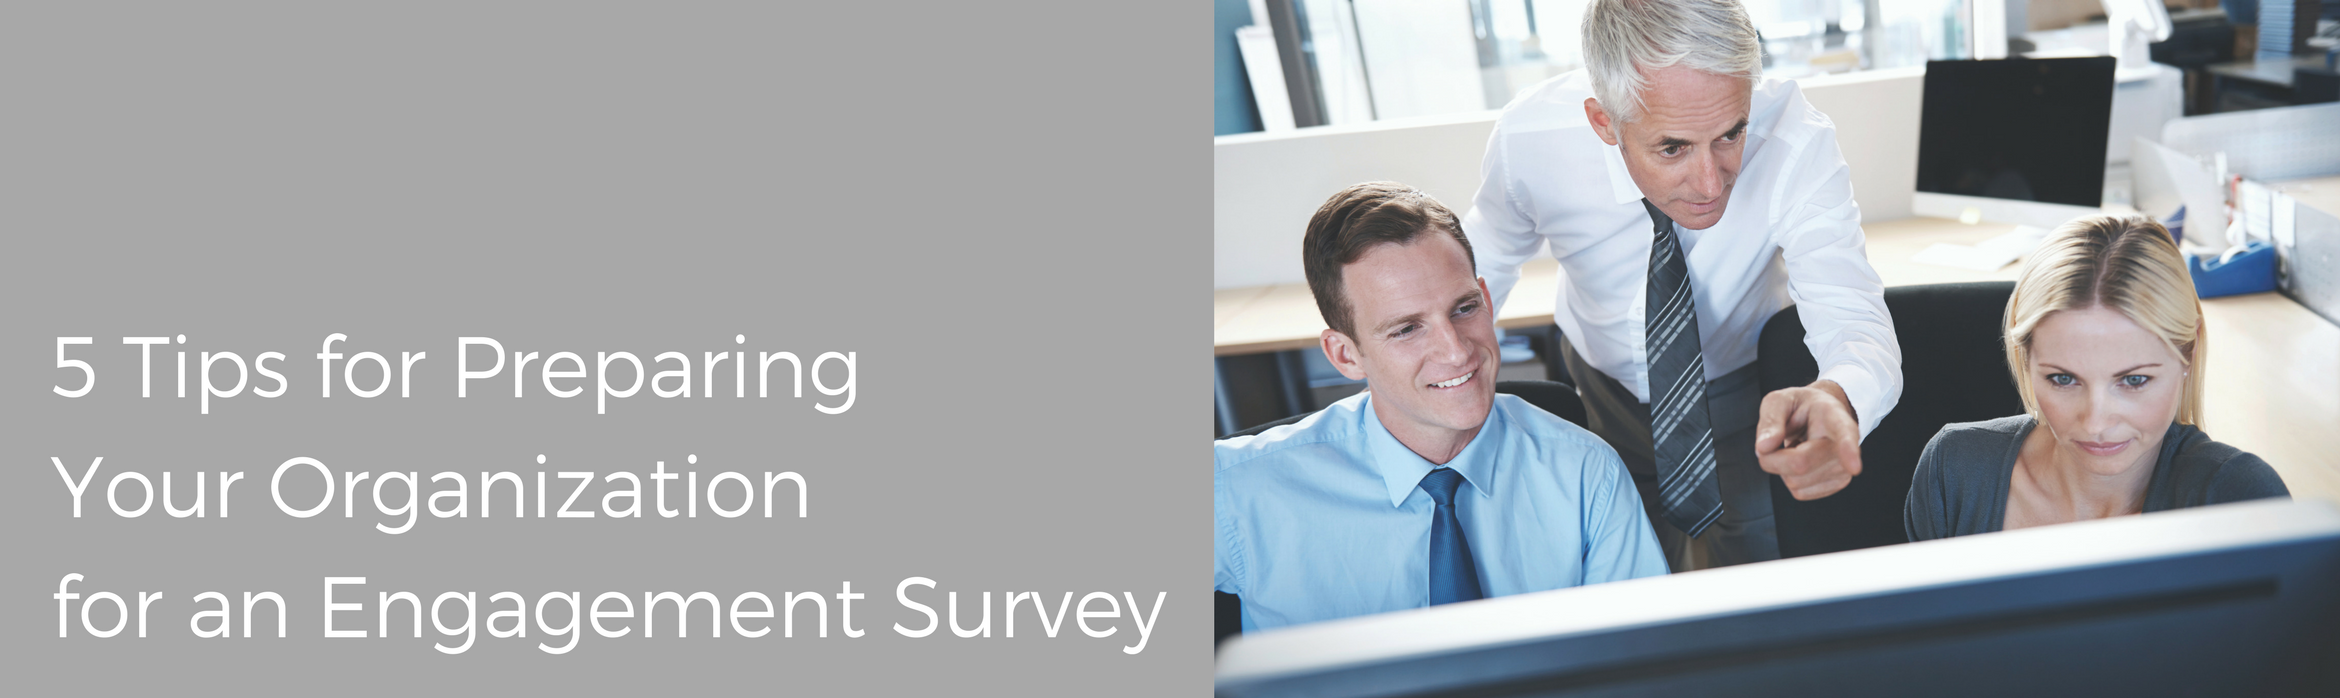 5 Tips for Preparing your Organization for an Engagement Survey